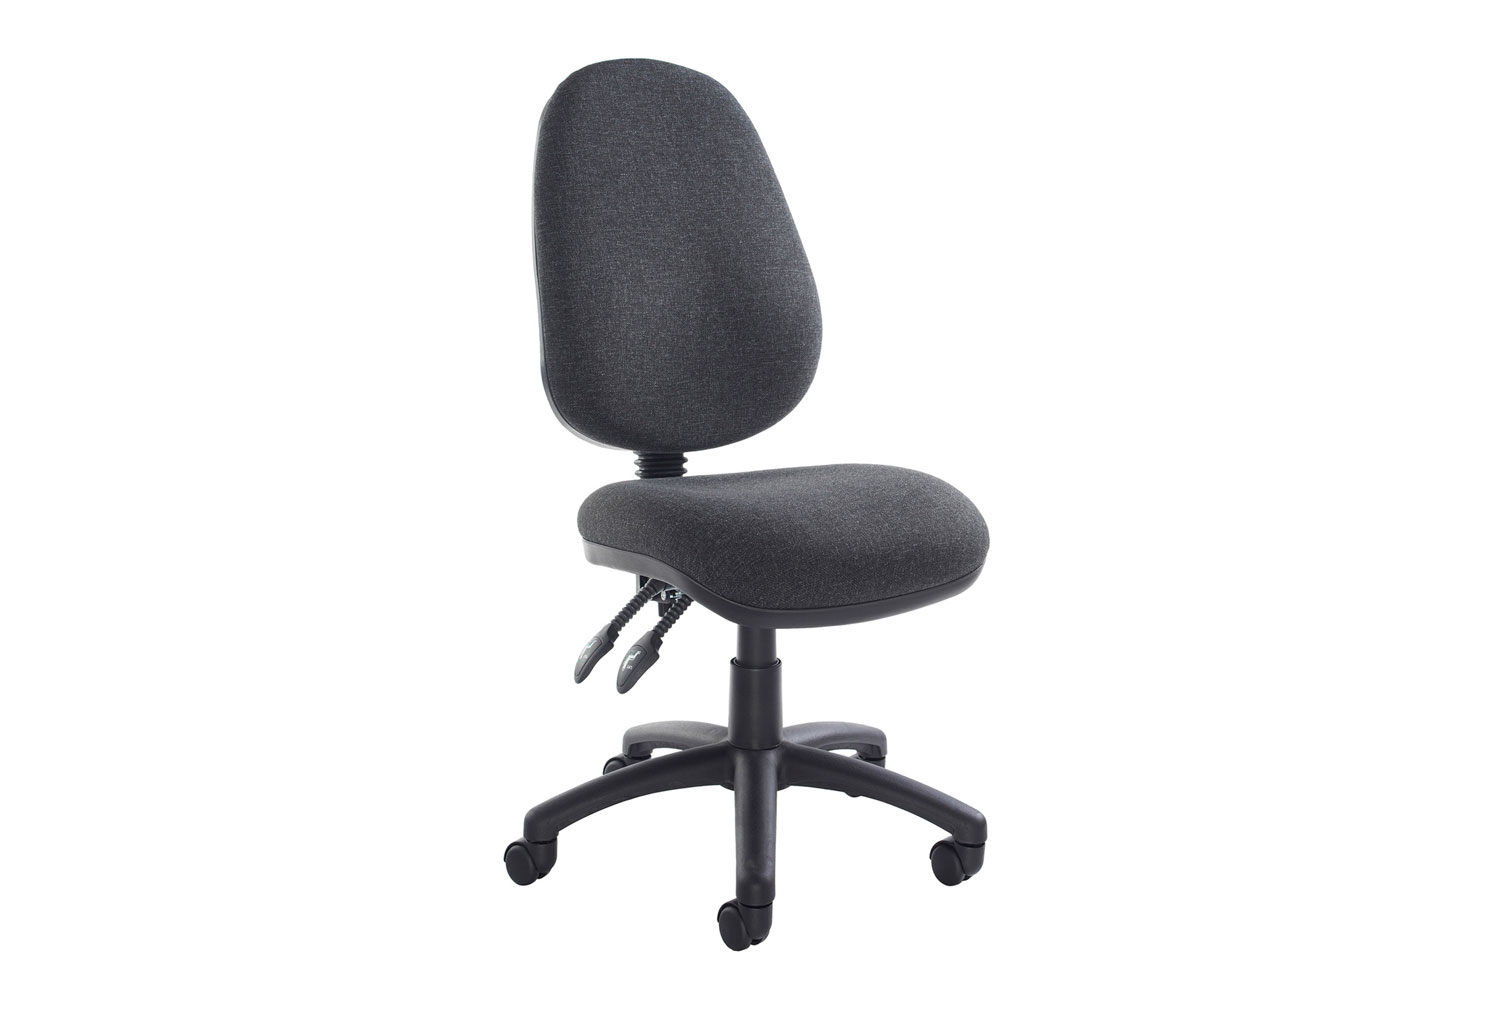 Full Lumbar 2 Lever Operator Office Chair No Arms, Charcoal, Express Delivery